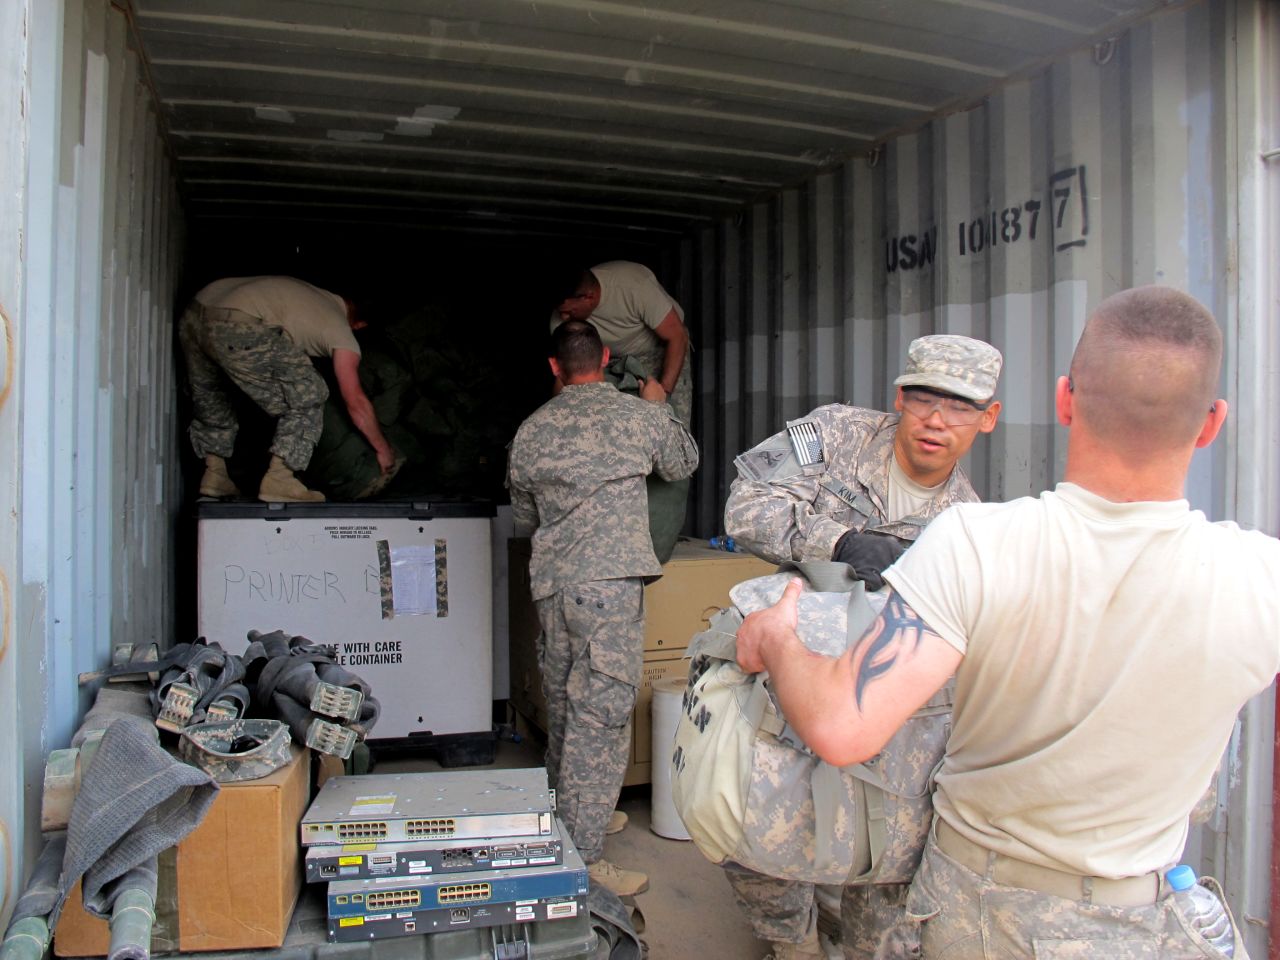 Troops in Kuwait load gear at Camp Virginia, which is located a short distance from the border crossing used in the 2003 invasion that toppled Saddam Hussein.